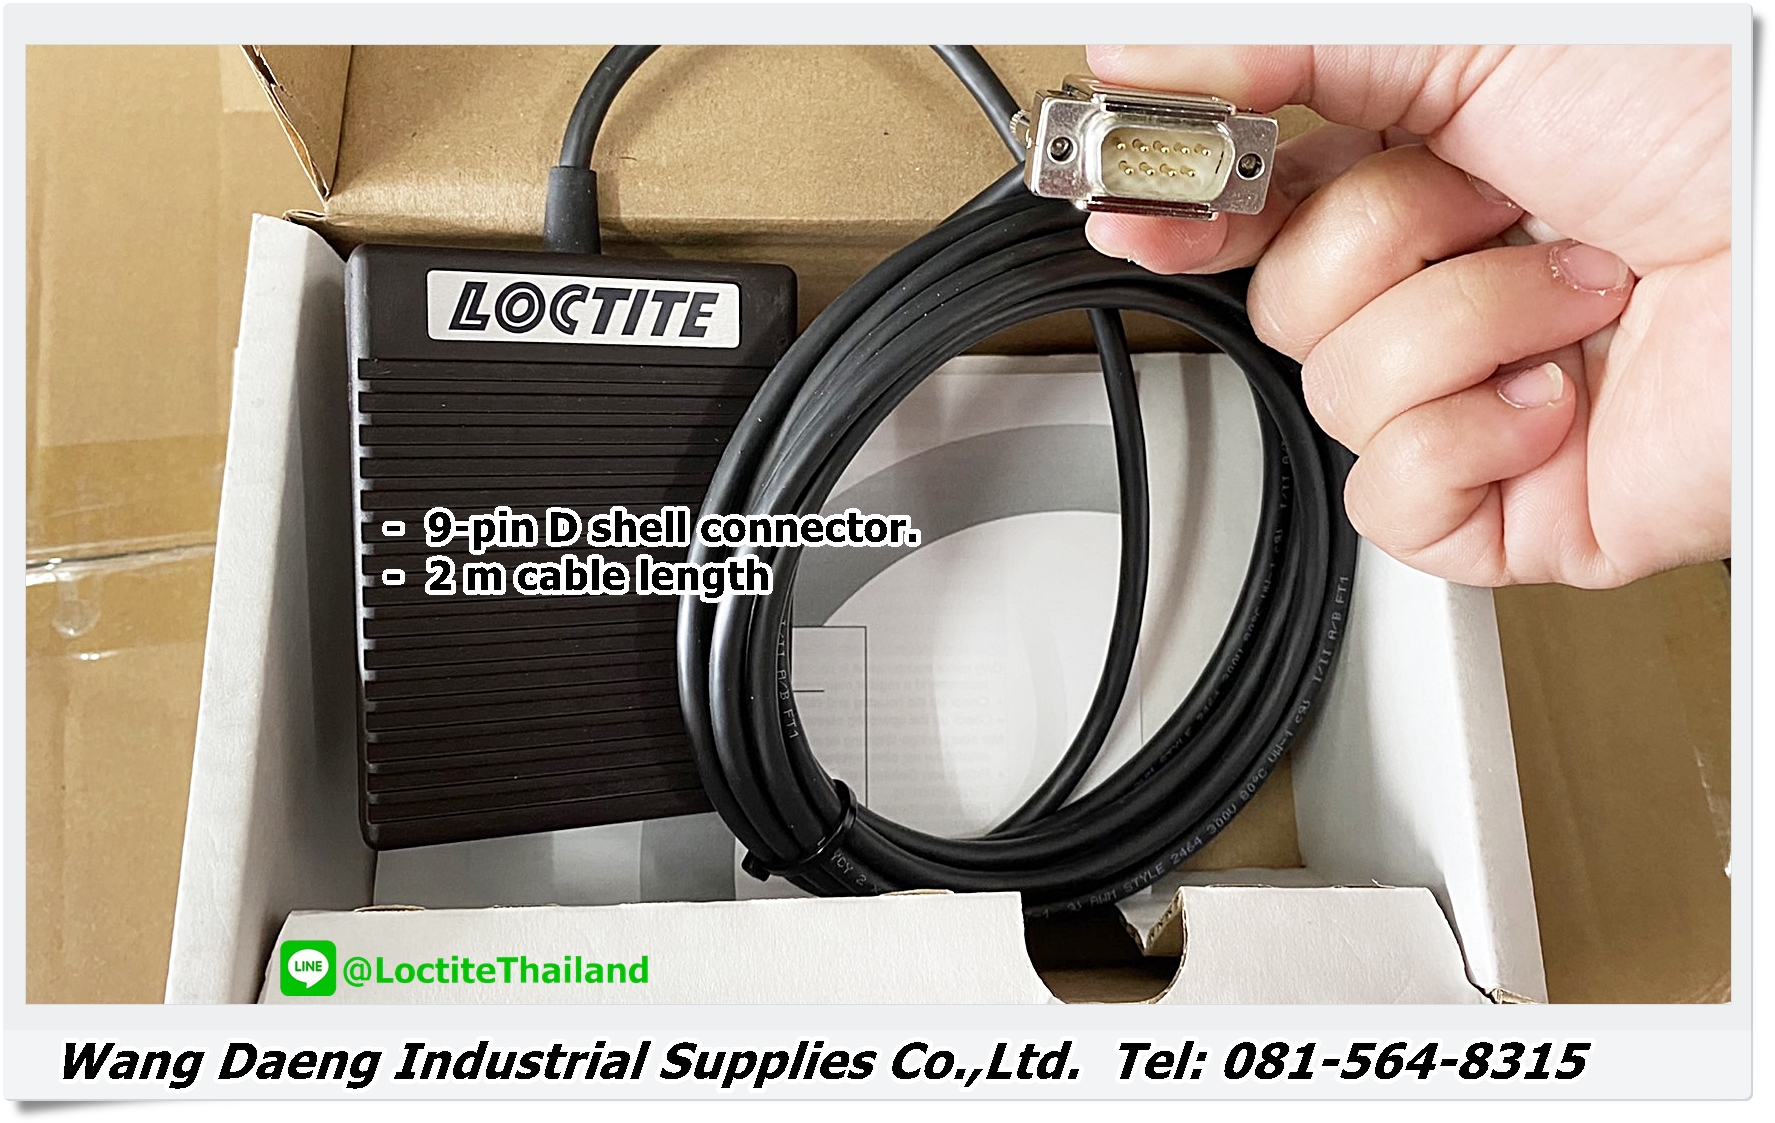 LOCTITE 97201 (IDH 88653) Foot Switch